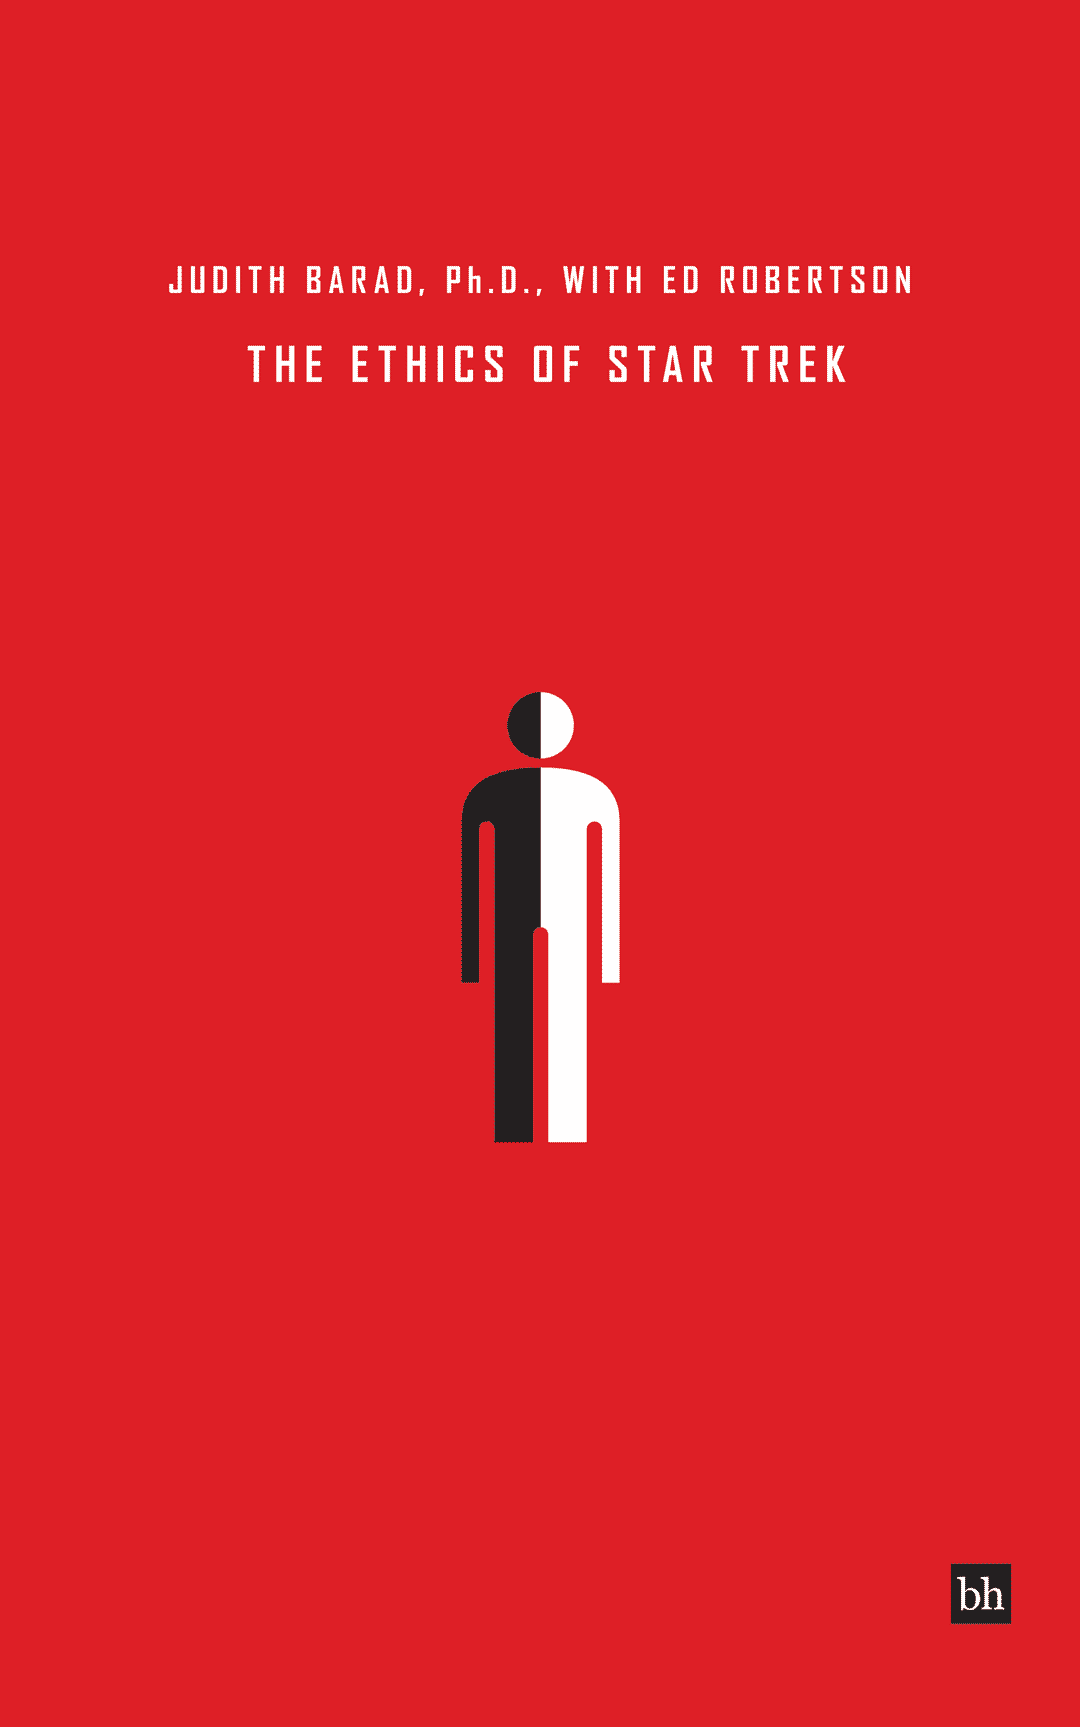 The Ethics of Star Trek by Judith Barad, Ph.D. with Ed Robertson